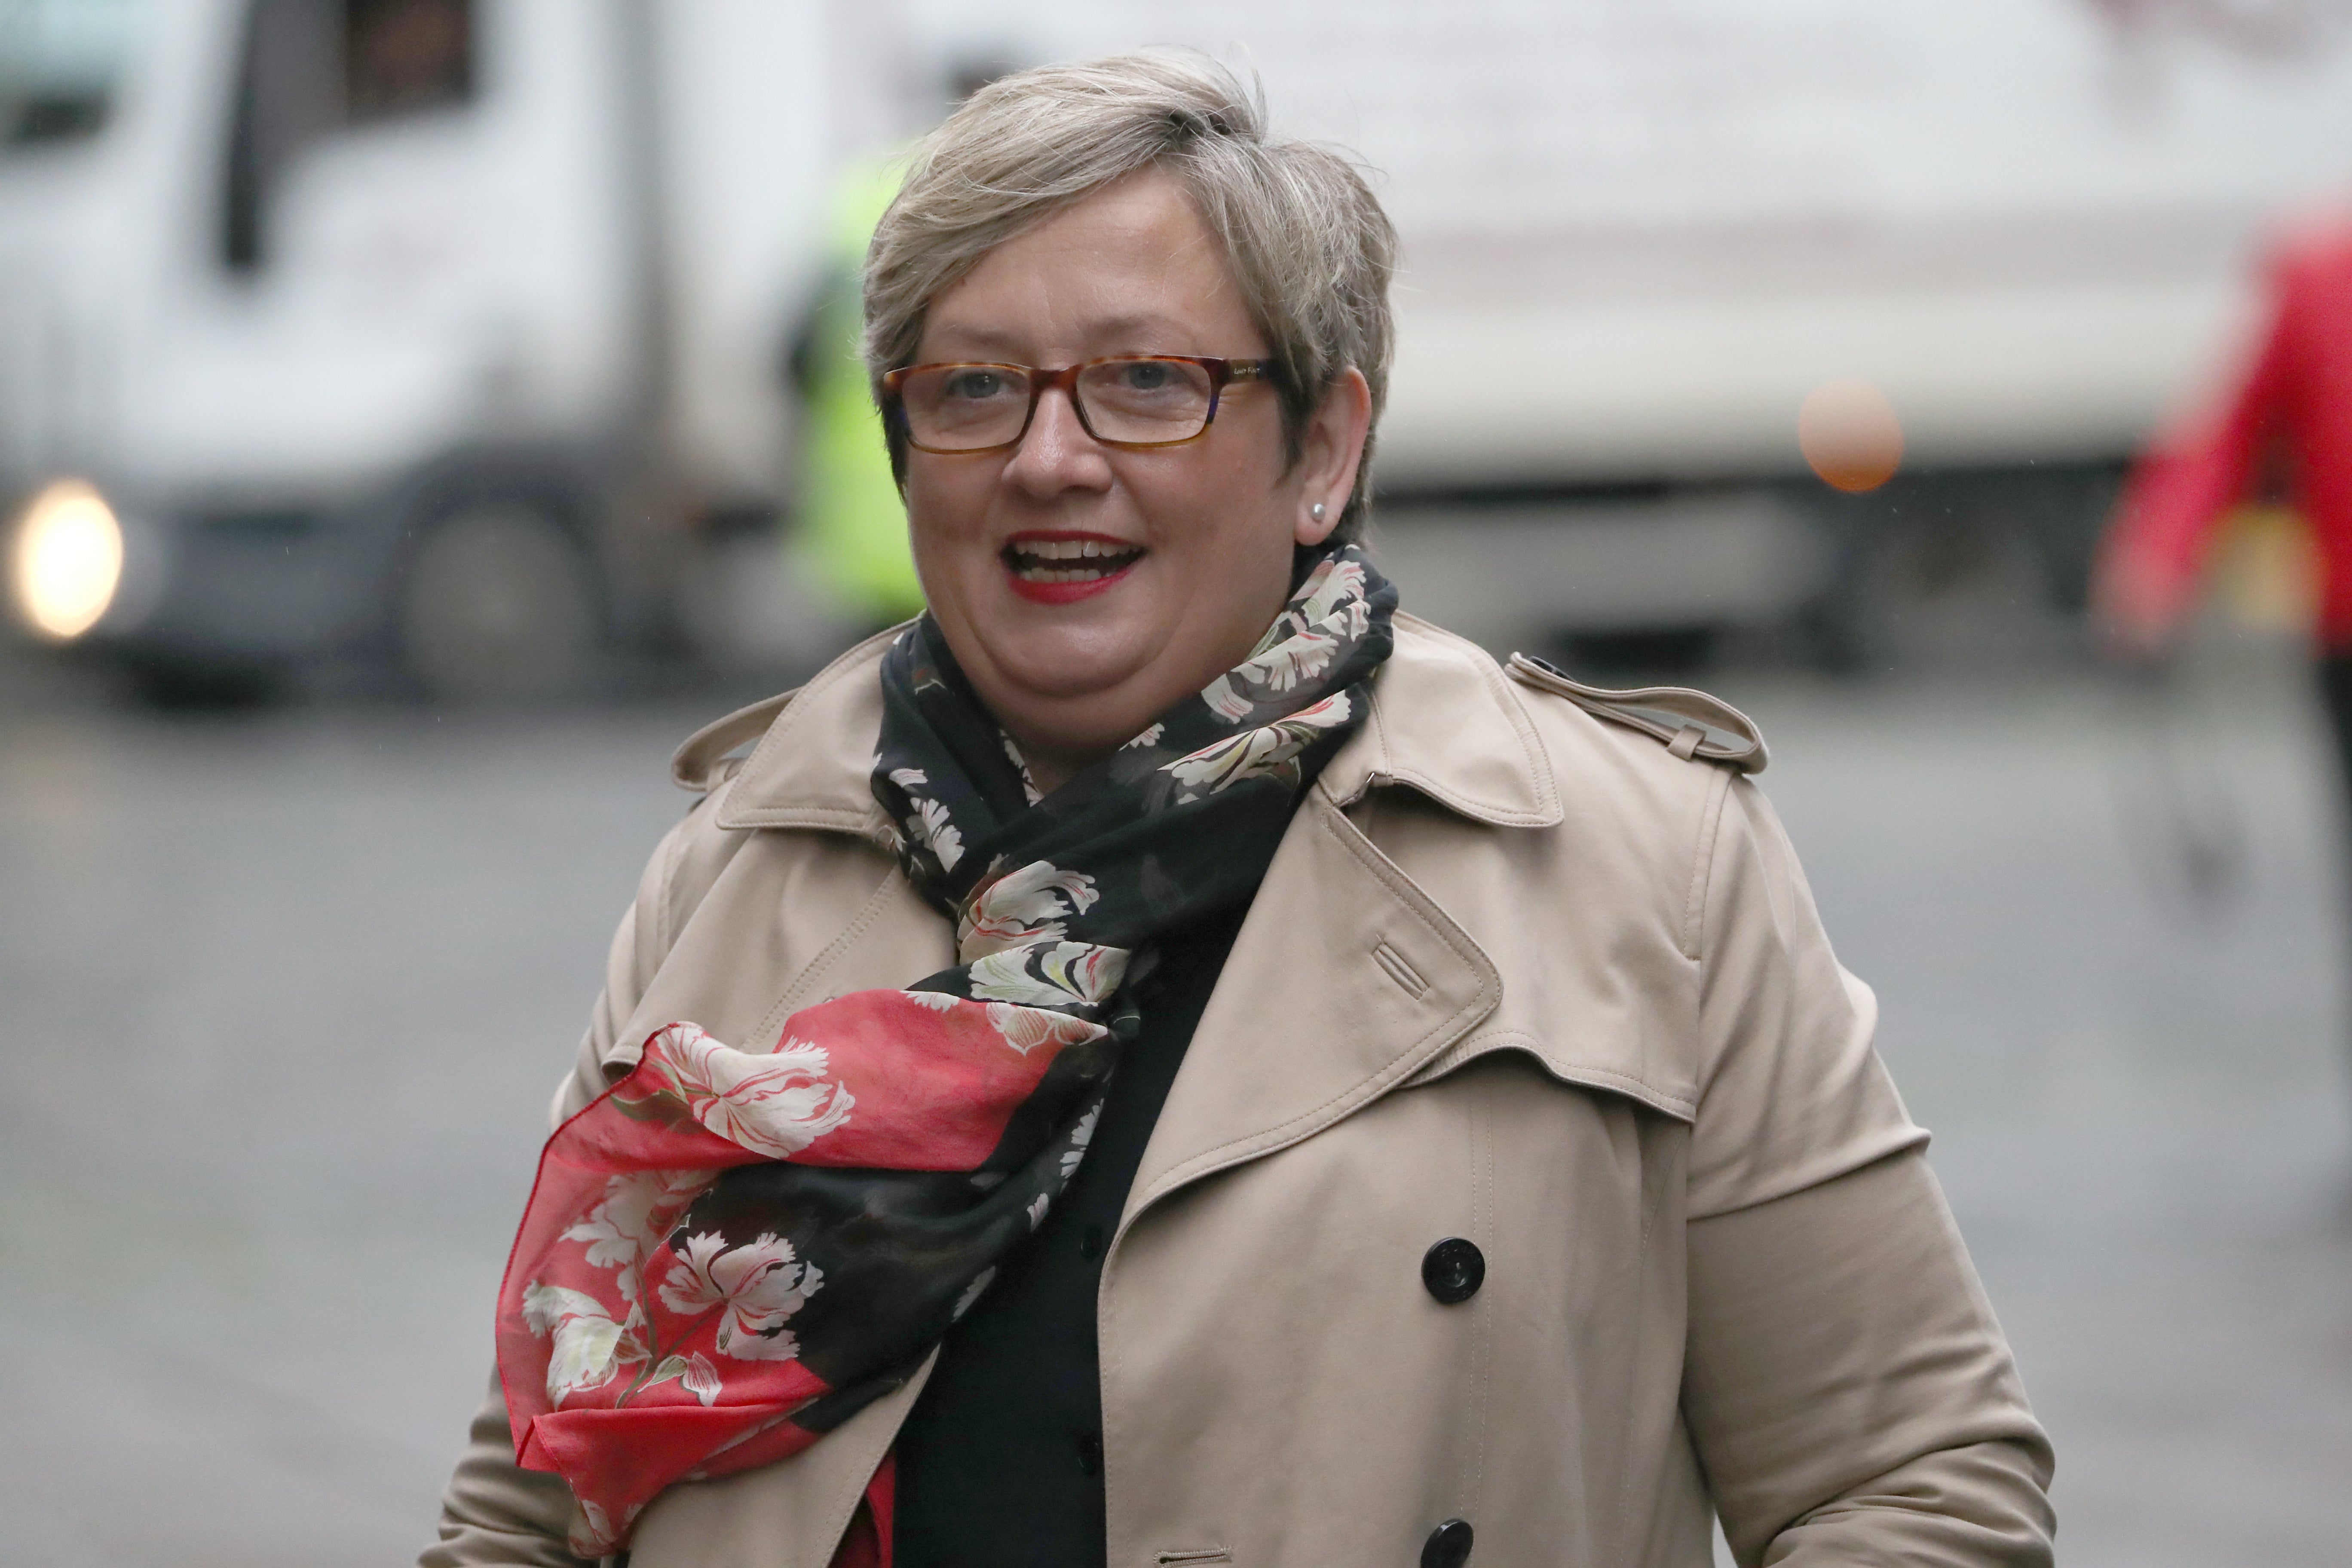 Joanna Cherry said the scale of poverty in the UK should shame the Government (Andrew Milligan/PA)